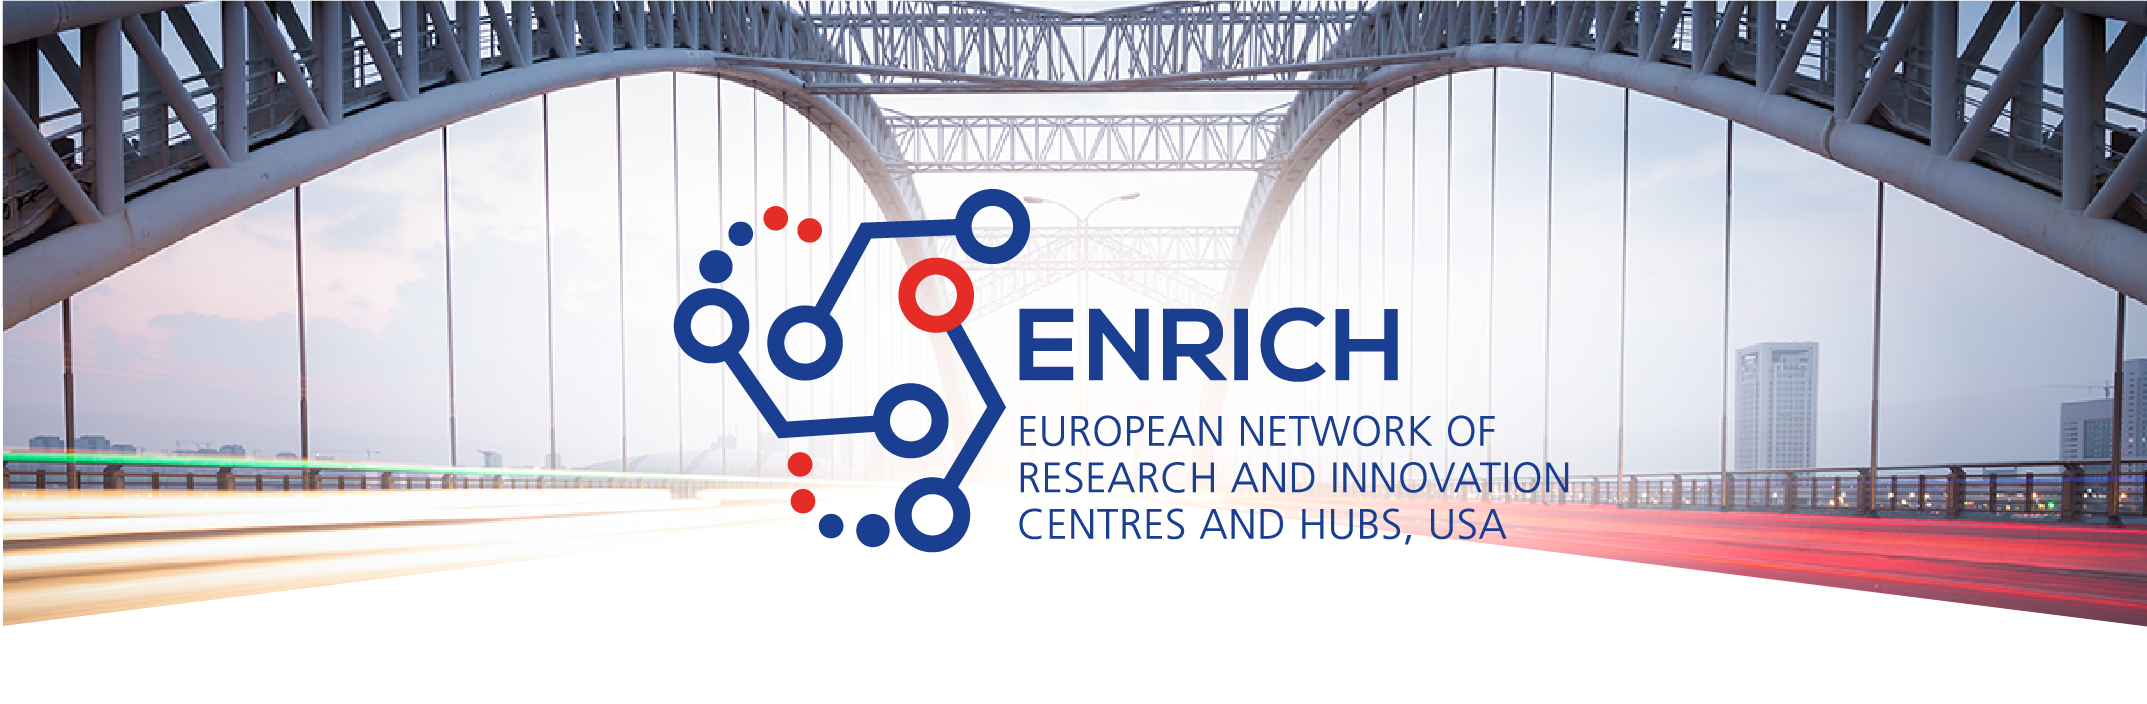 EEN Matchmaking Supported by ENRICH in the USA - "Together Against Corona"